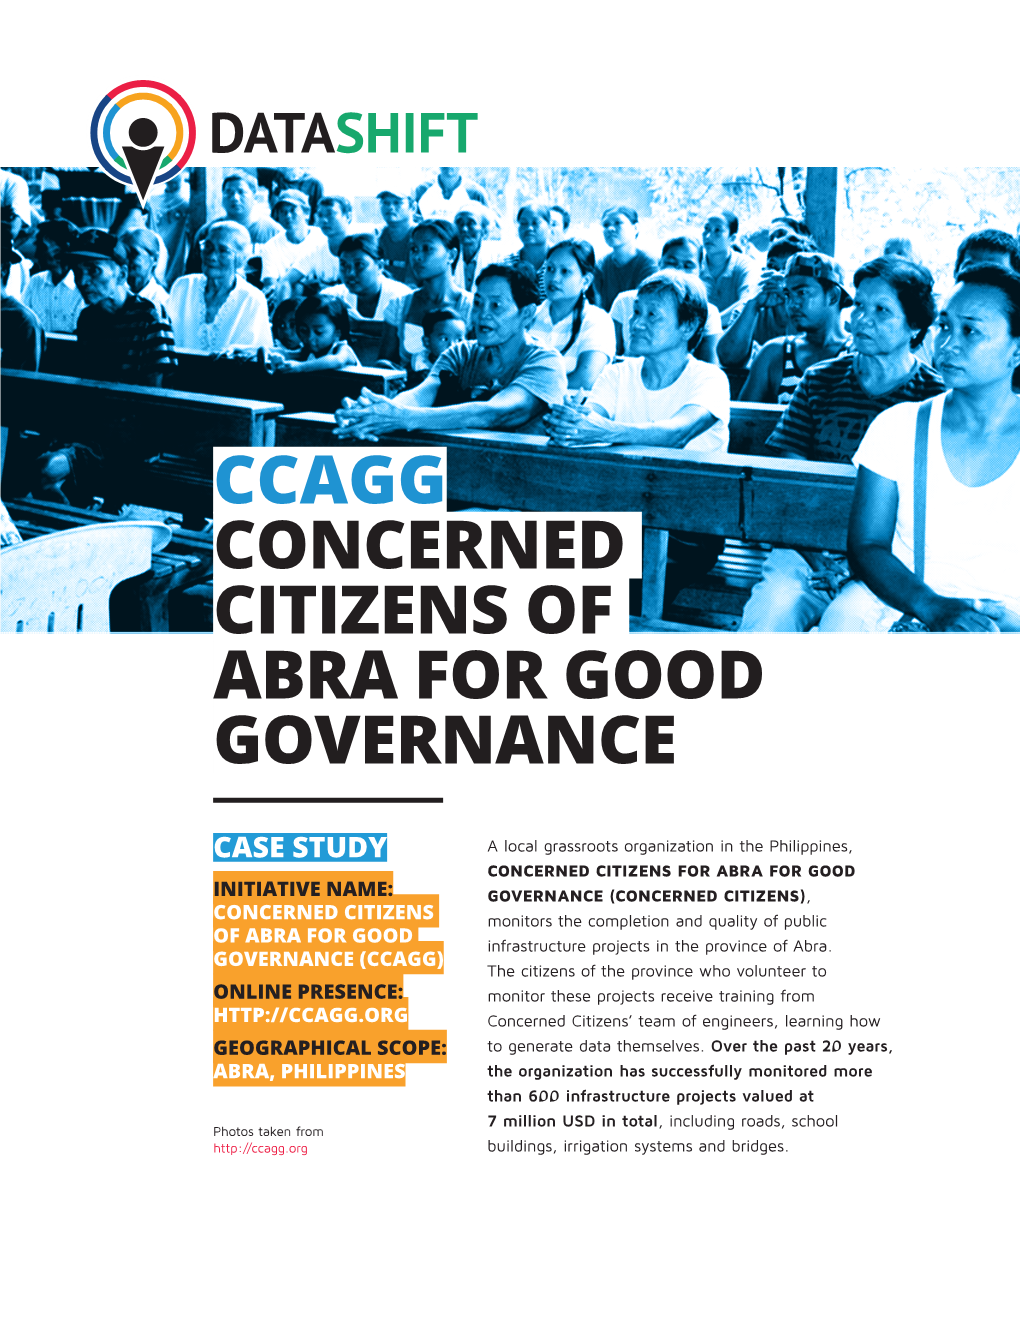 Ccagg Concerned Citizens of Abra for Good Governance